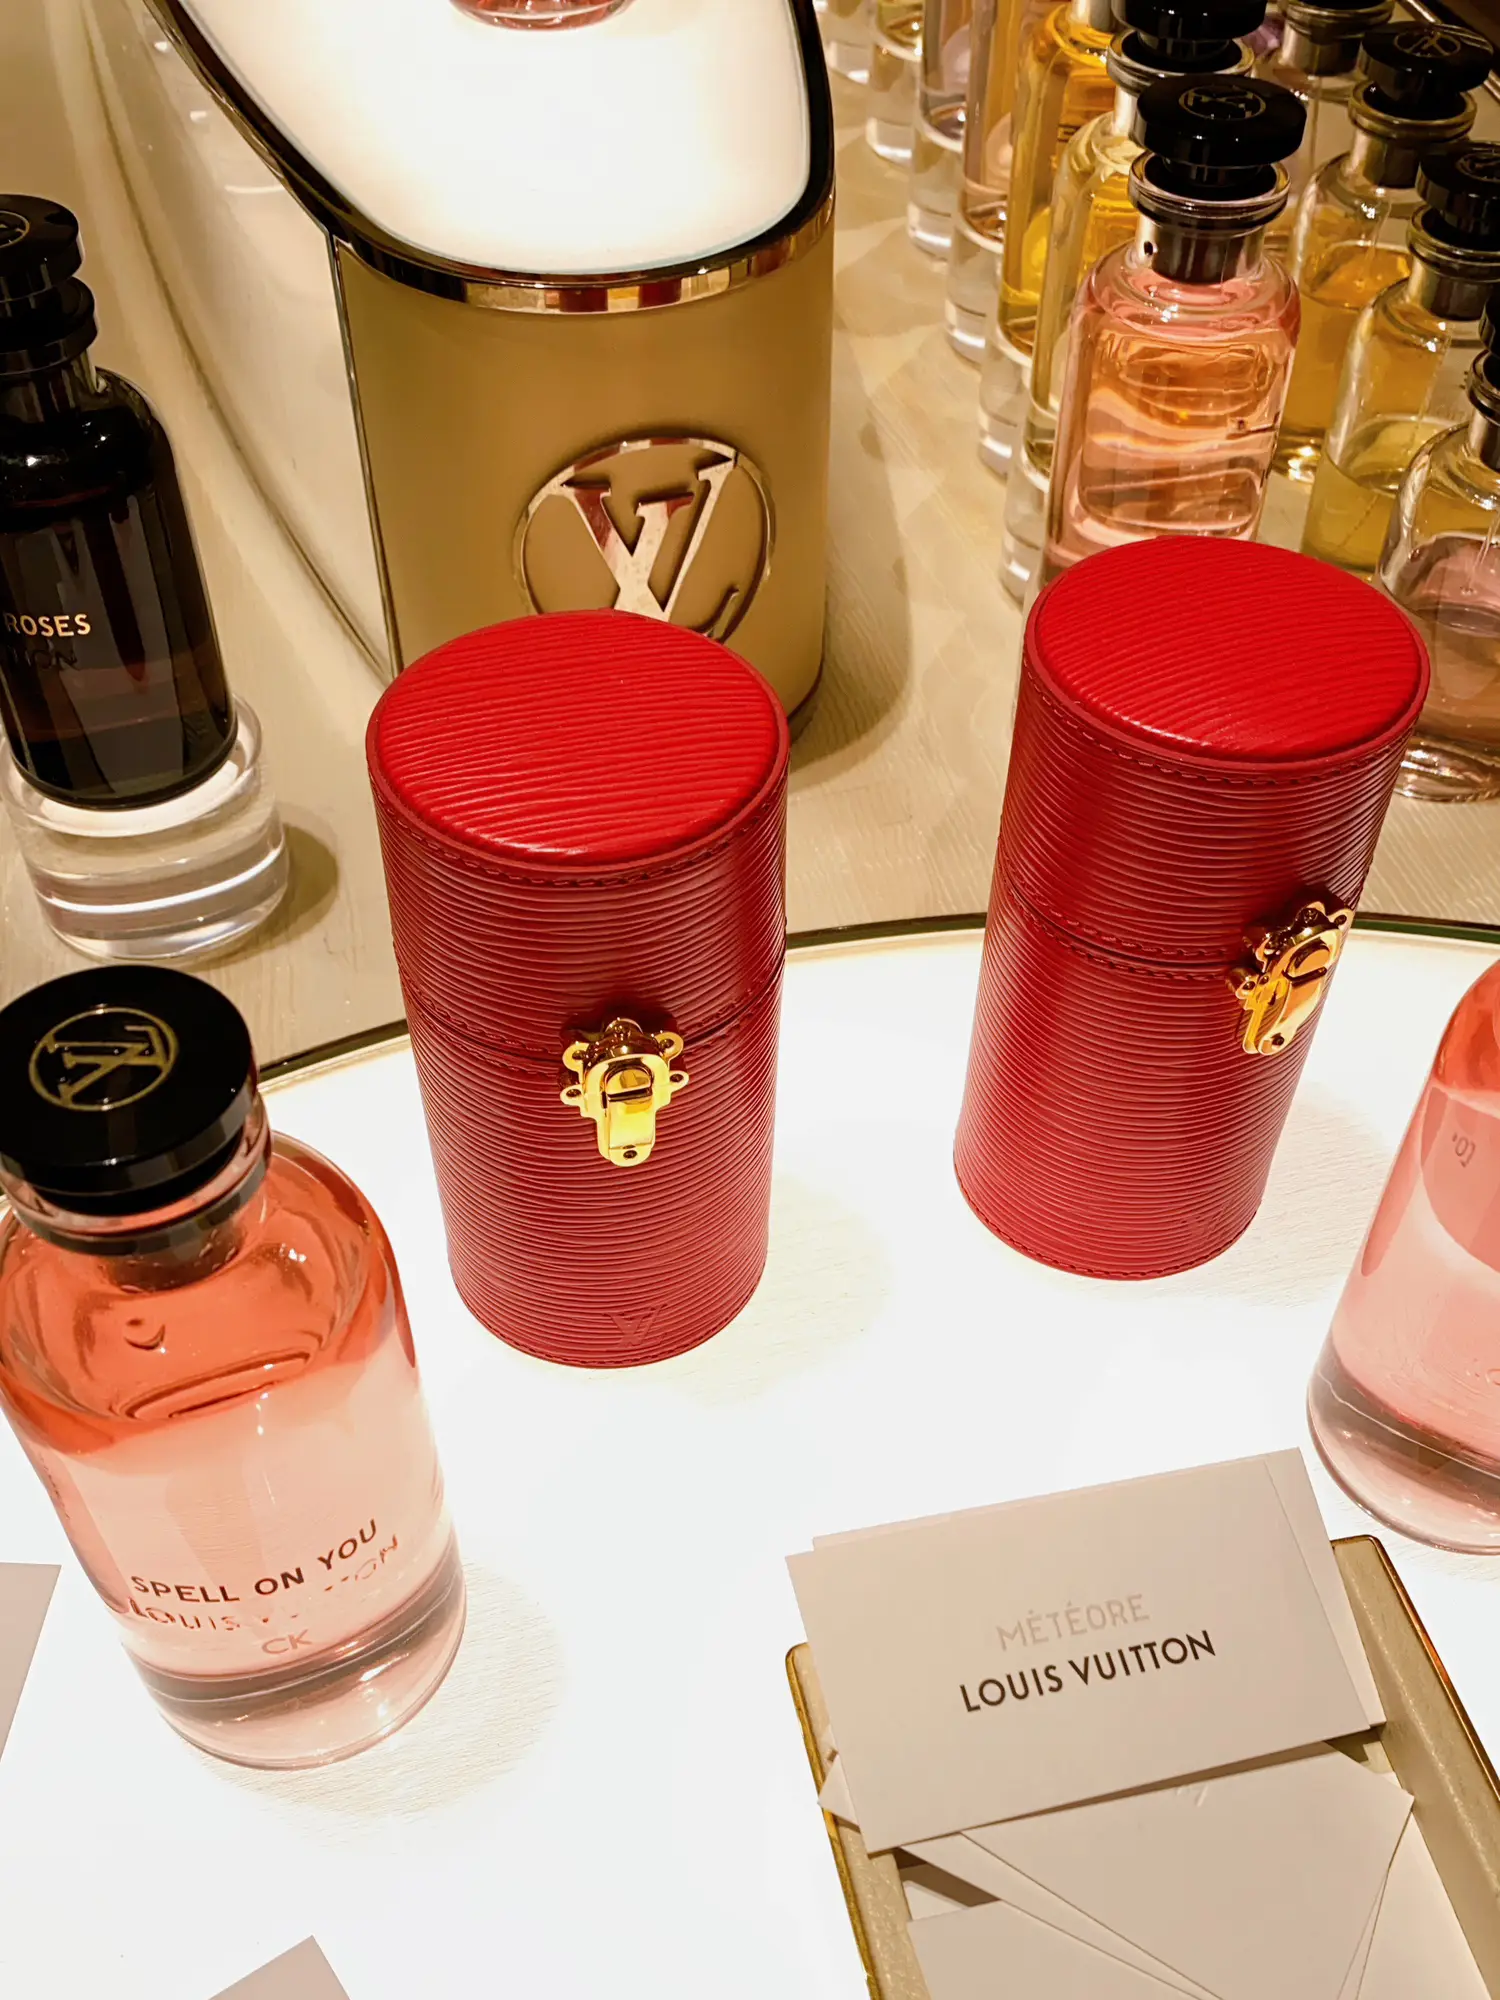 LOUIS VUITTON fragrance review SPELL ON YOU - LV perfume - does